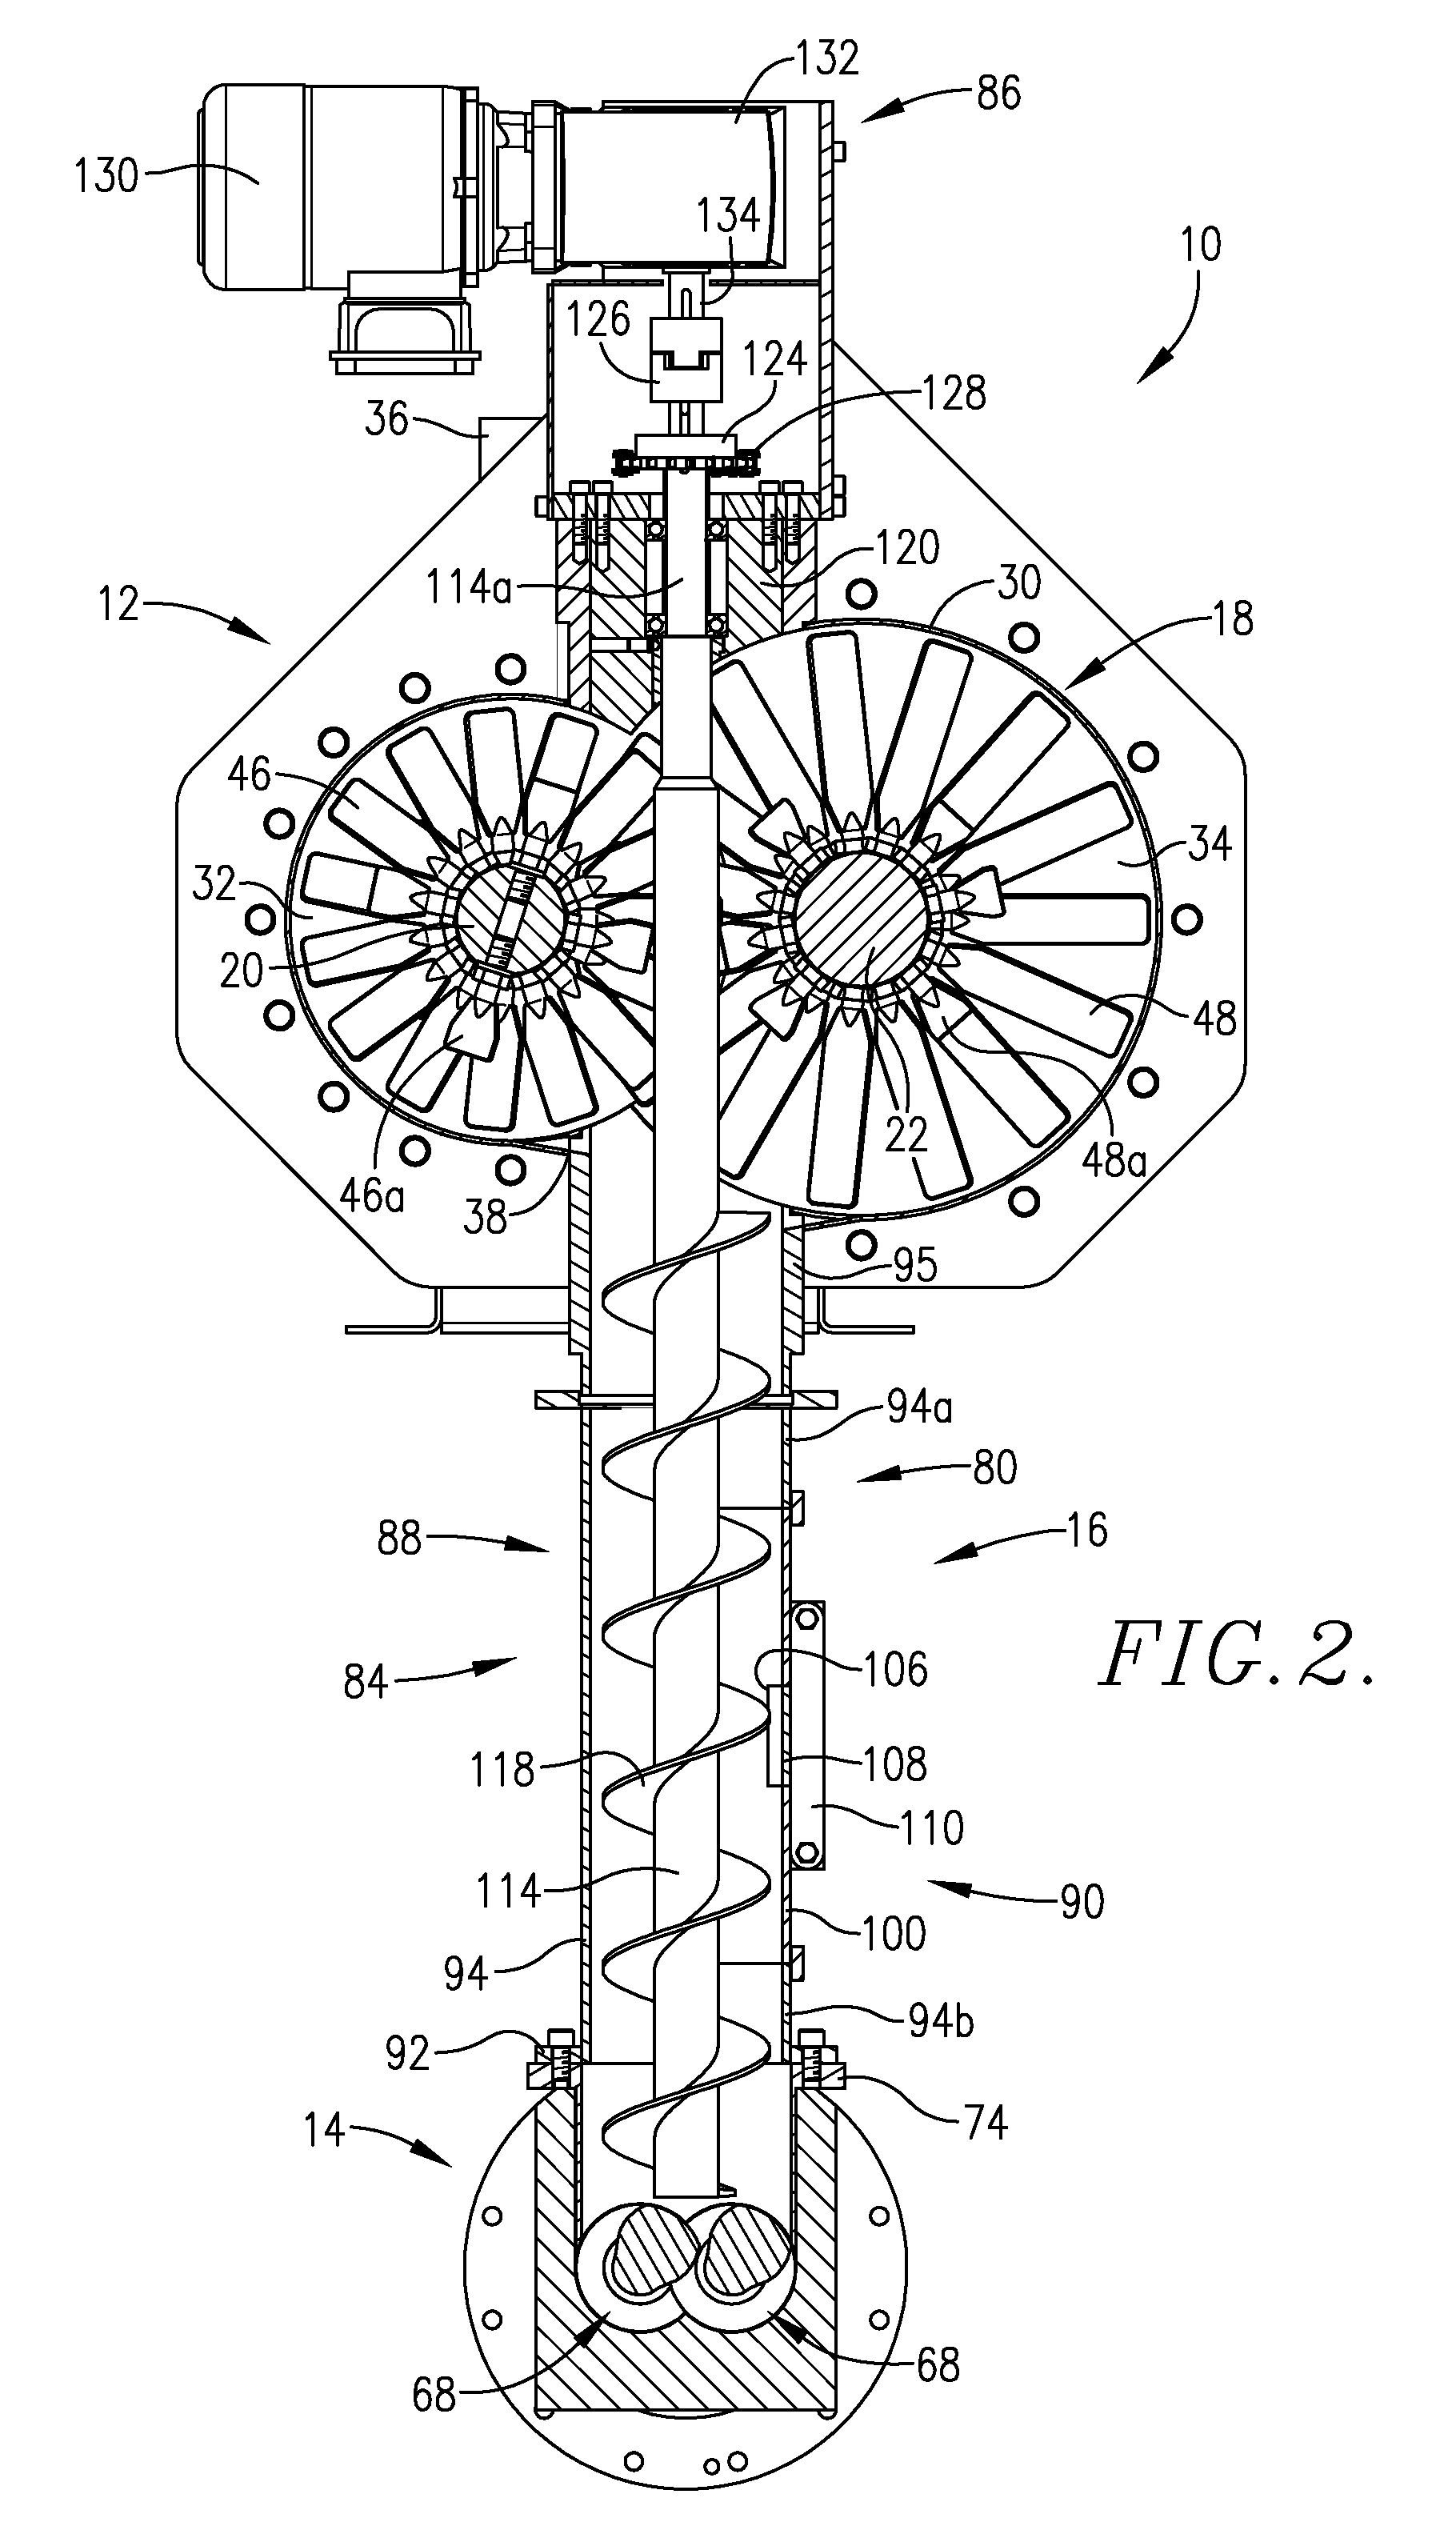 Method for positive feeding of preconditioned material into a twin screw extruder